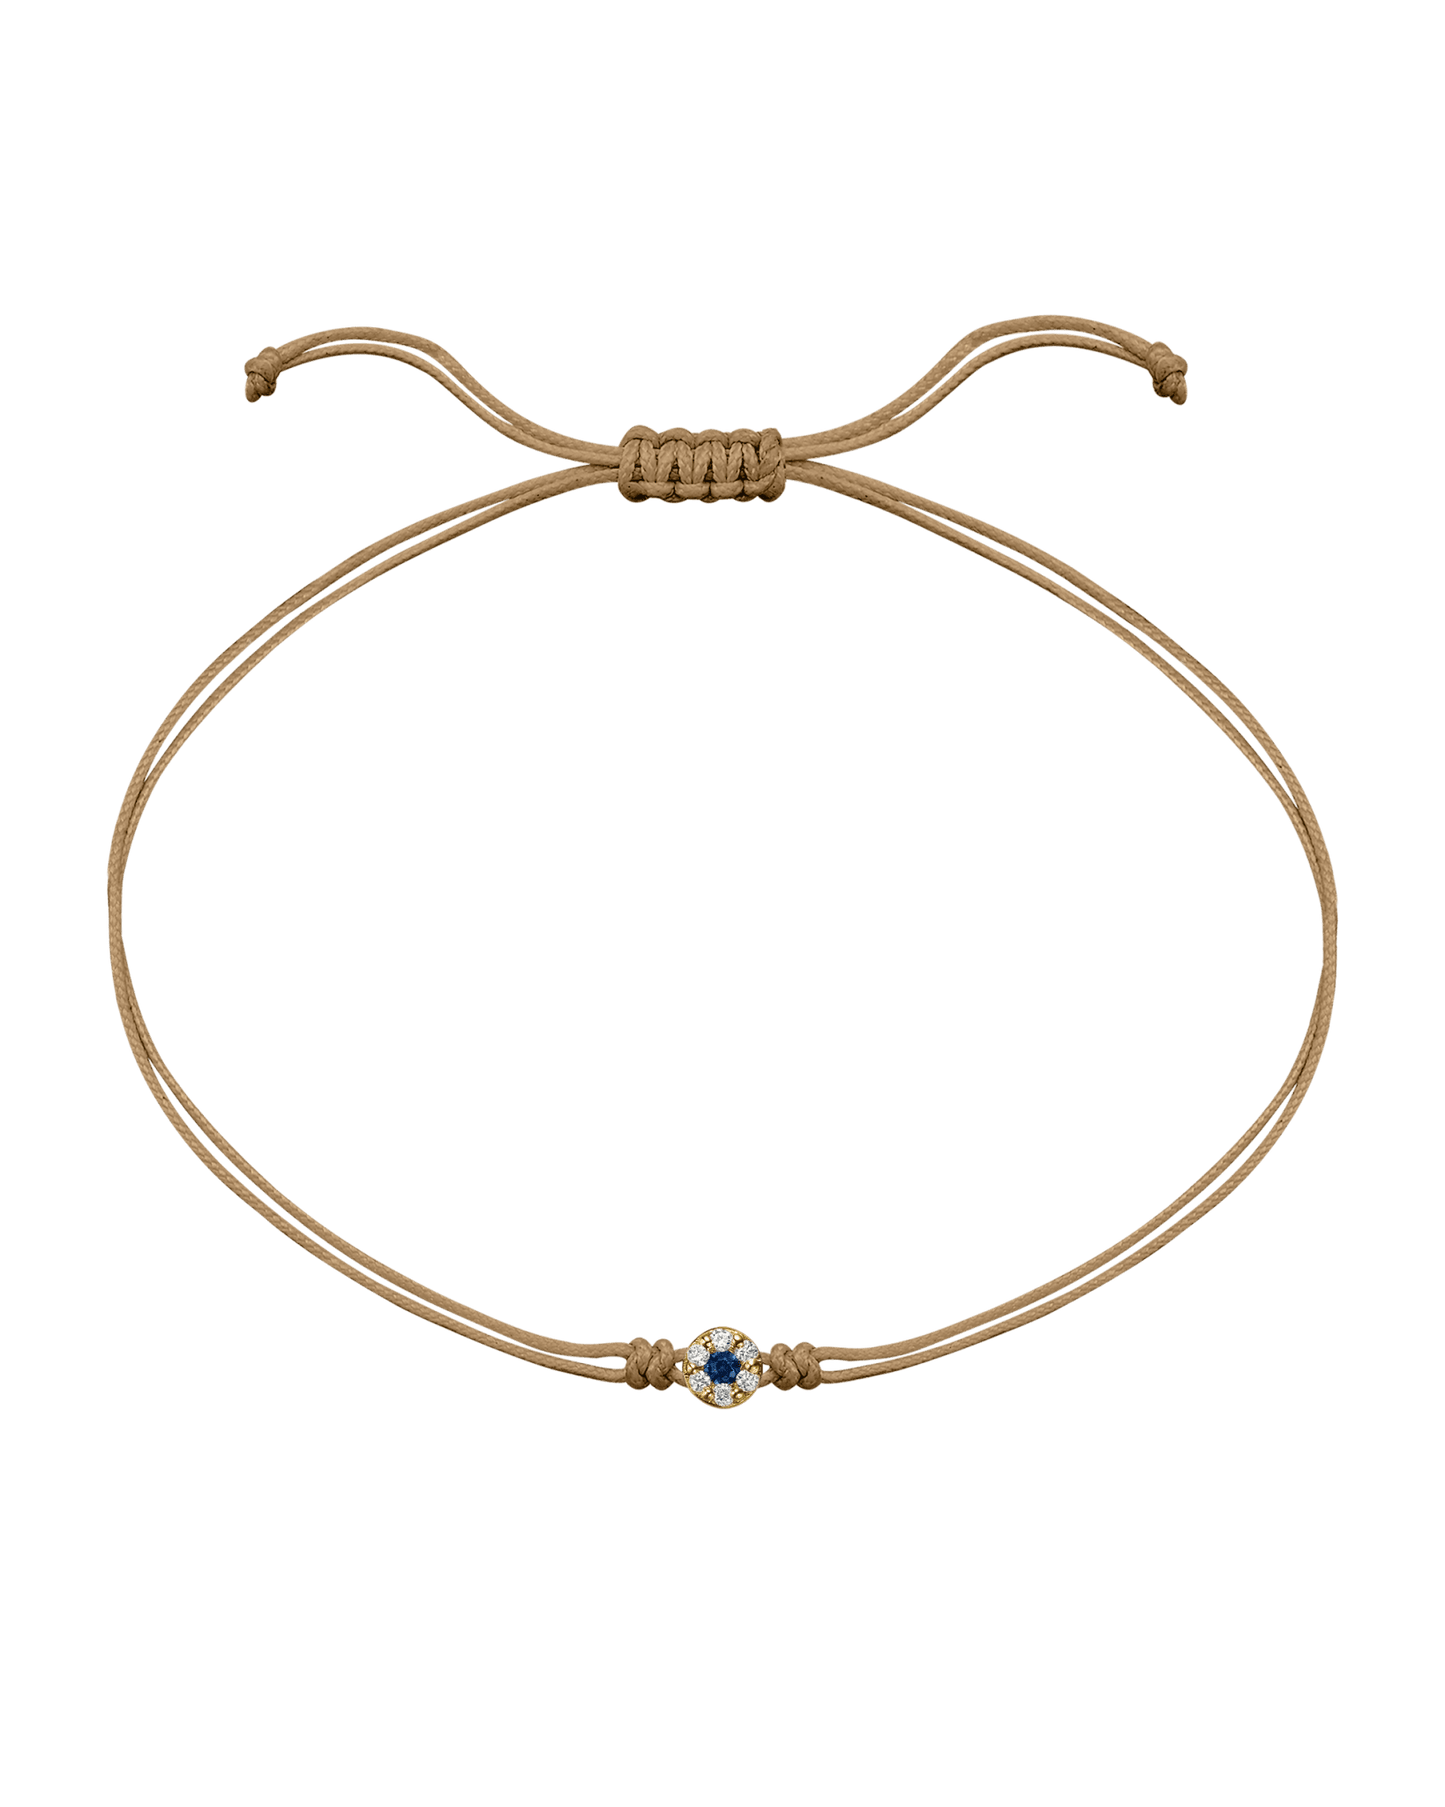 String of Love Diamond and Gemstone - 14K Yellow Gold Bracelet 14K Solid Gold Camel Sapphire 